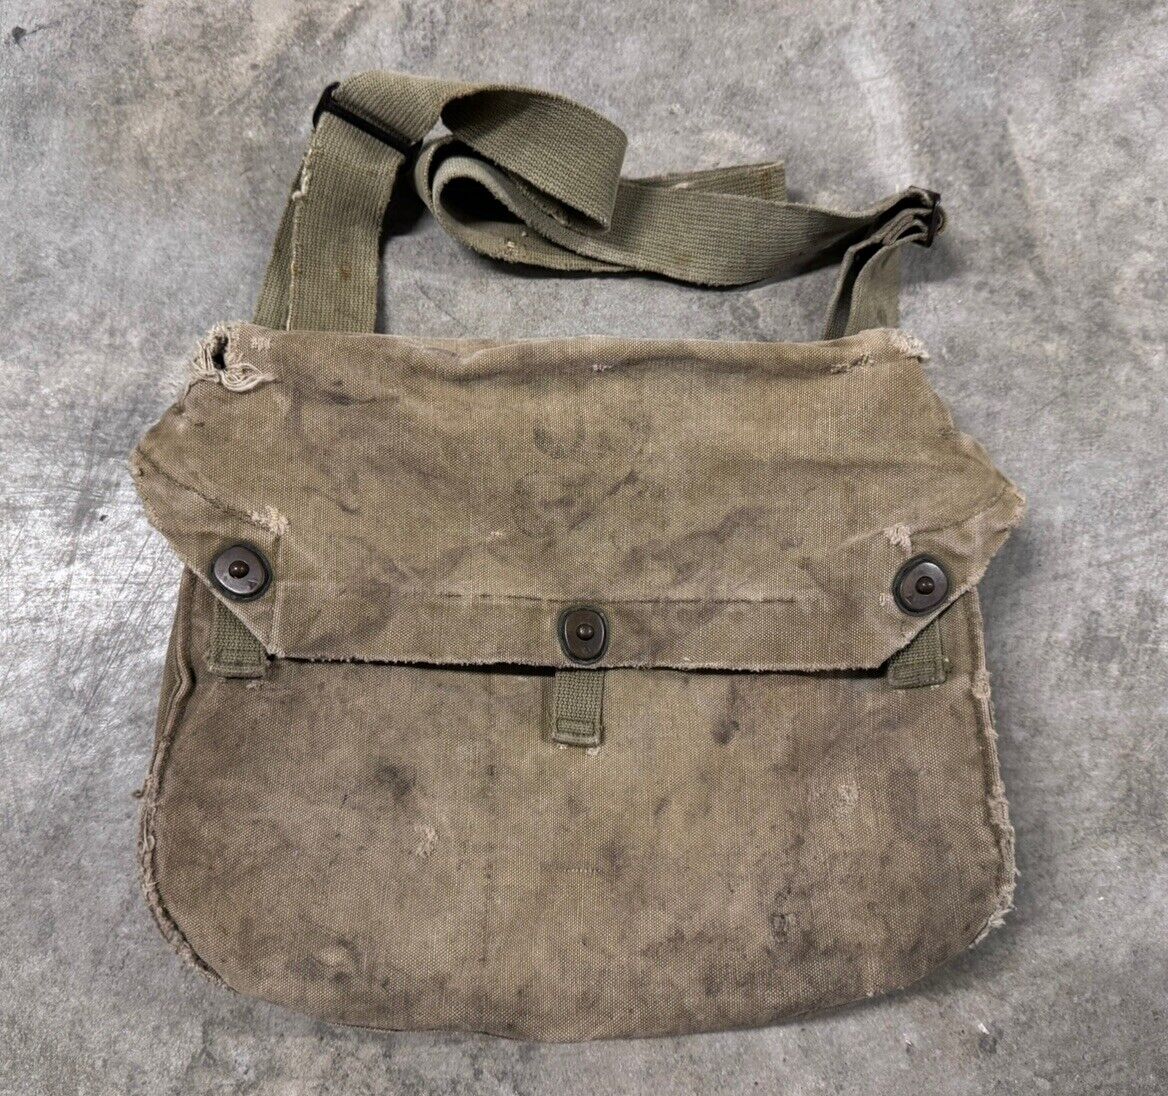 WWII WW2 US Army 1944 Transitional Gas Mask Carrier Bag Vintage Canvas Messenger